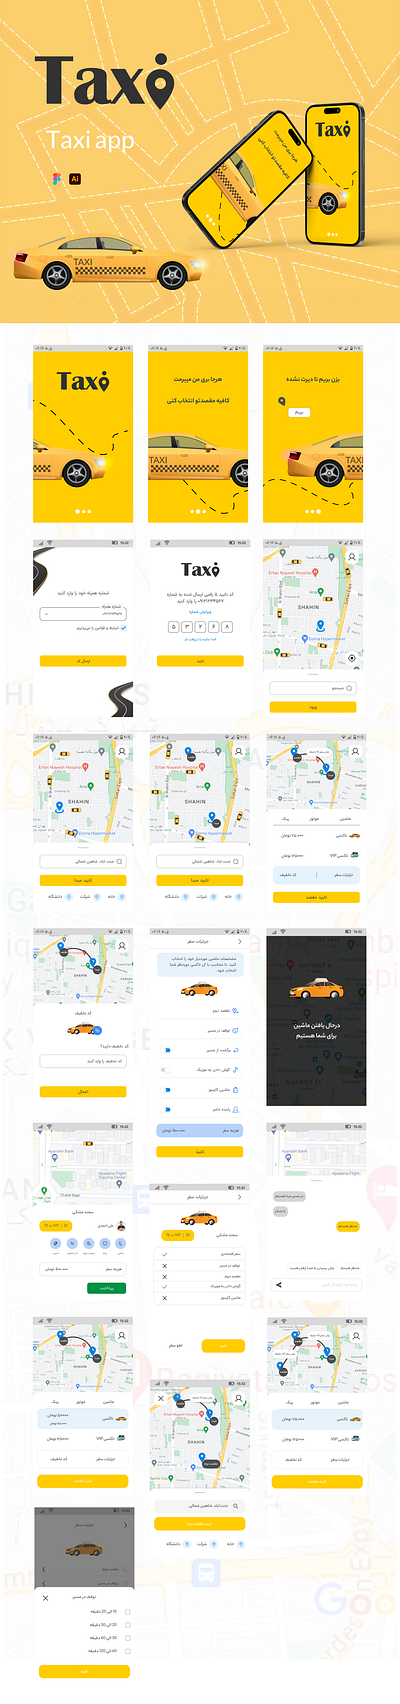 Taxi app app branding design driver figma map page product design snap take taxi taxi uber ui ui ux ux